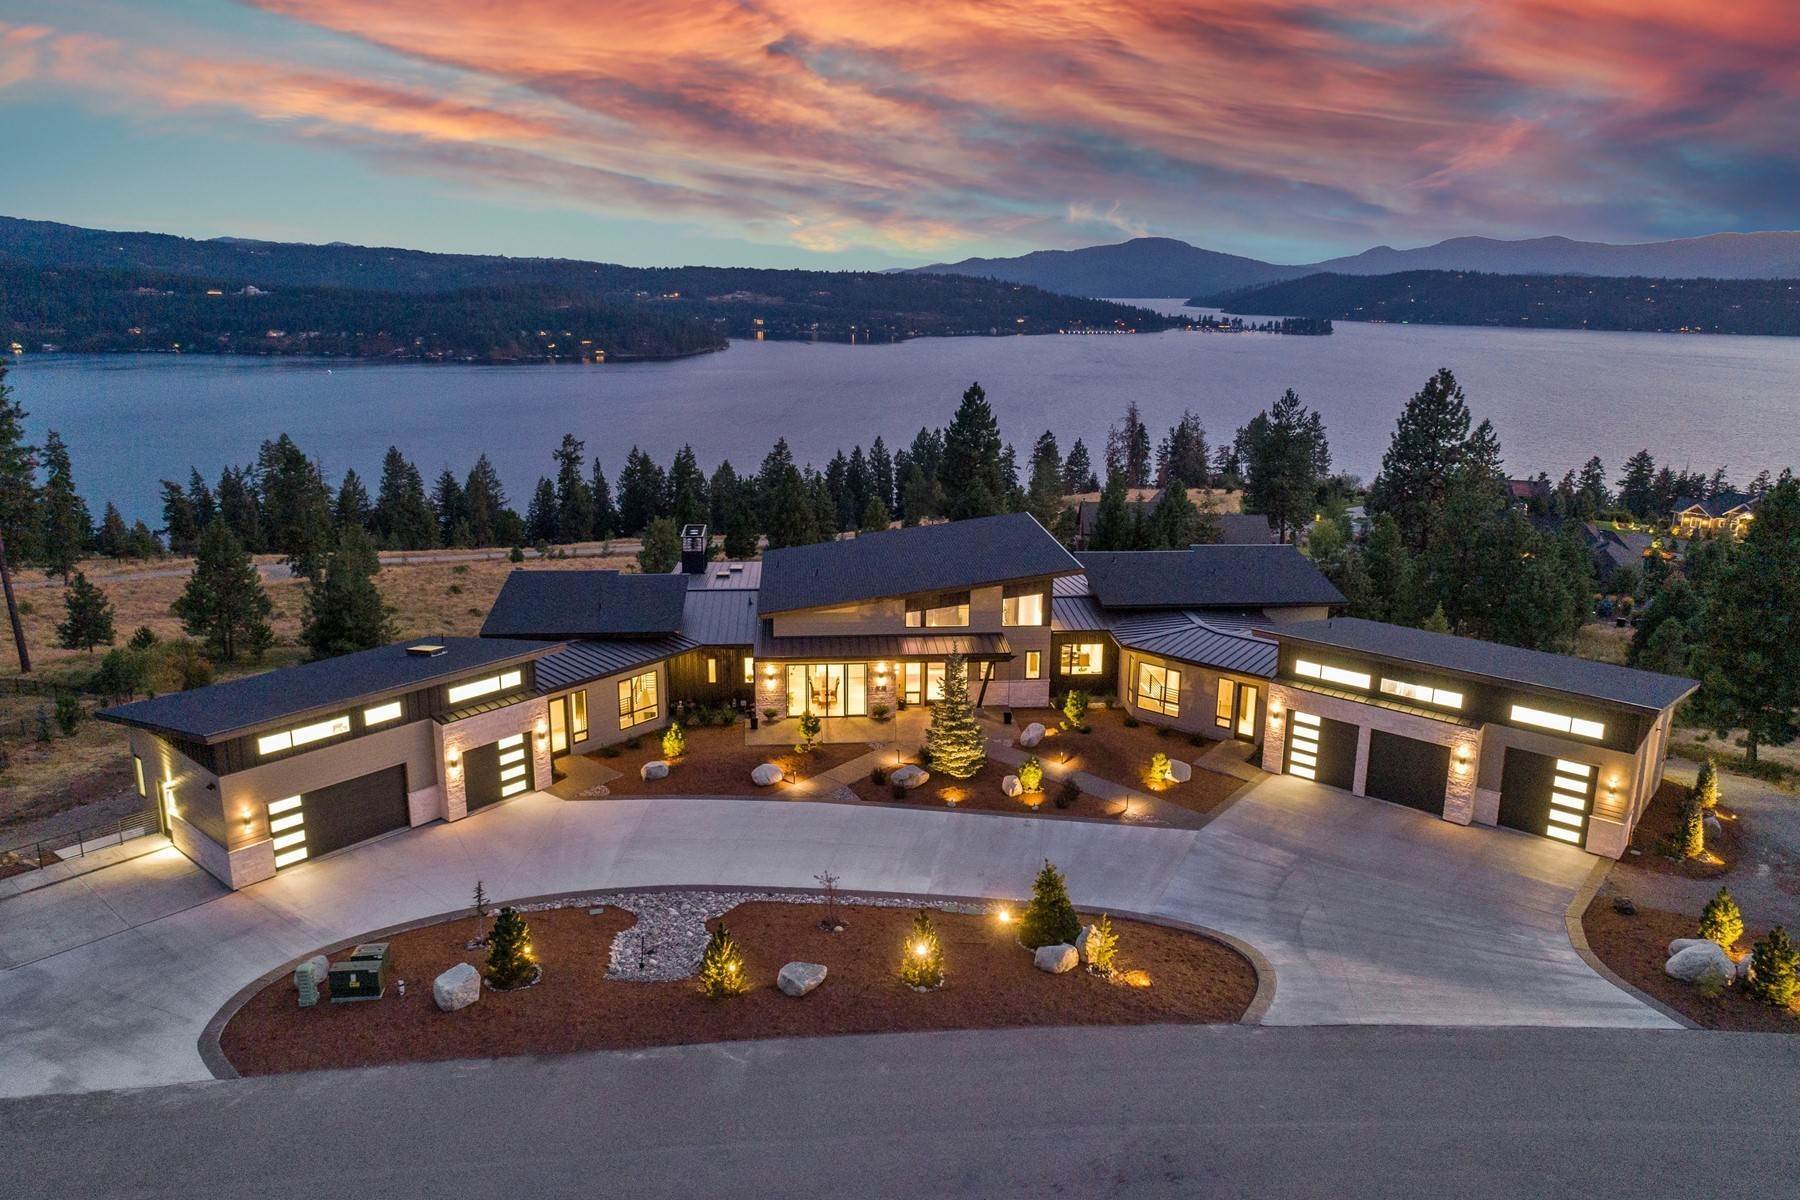 Property for Sale at Mountain Contemporary Beauty 2766 Helen Dr Coeur d’Alene, Idaho 83814 United States